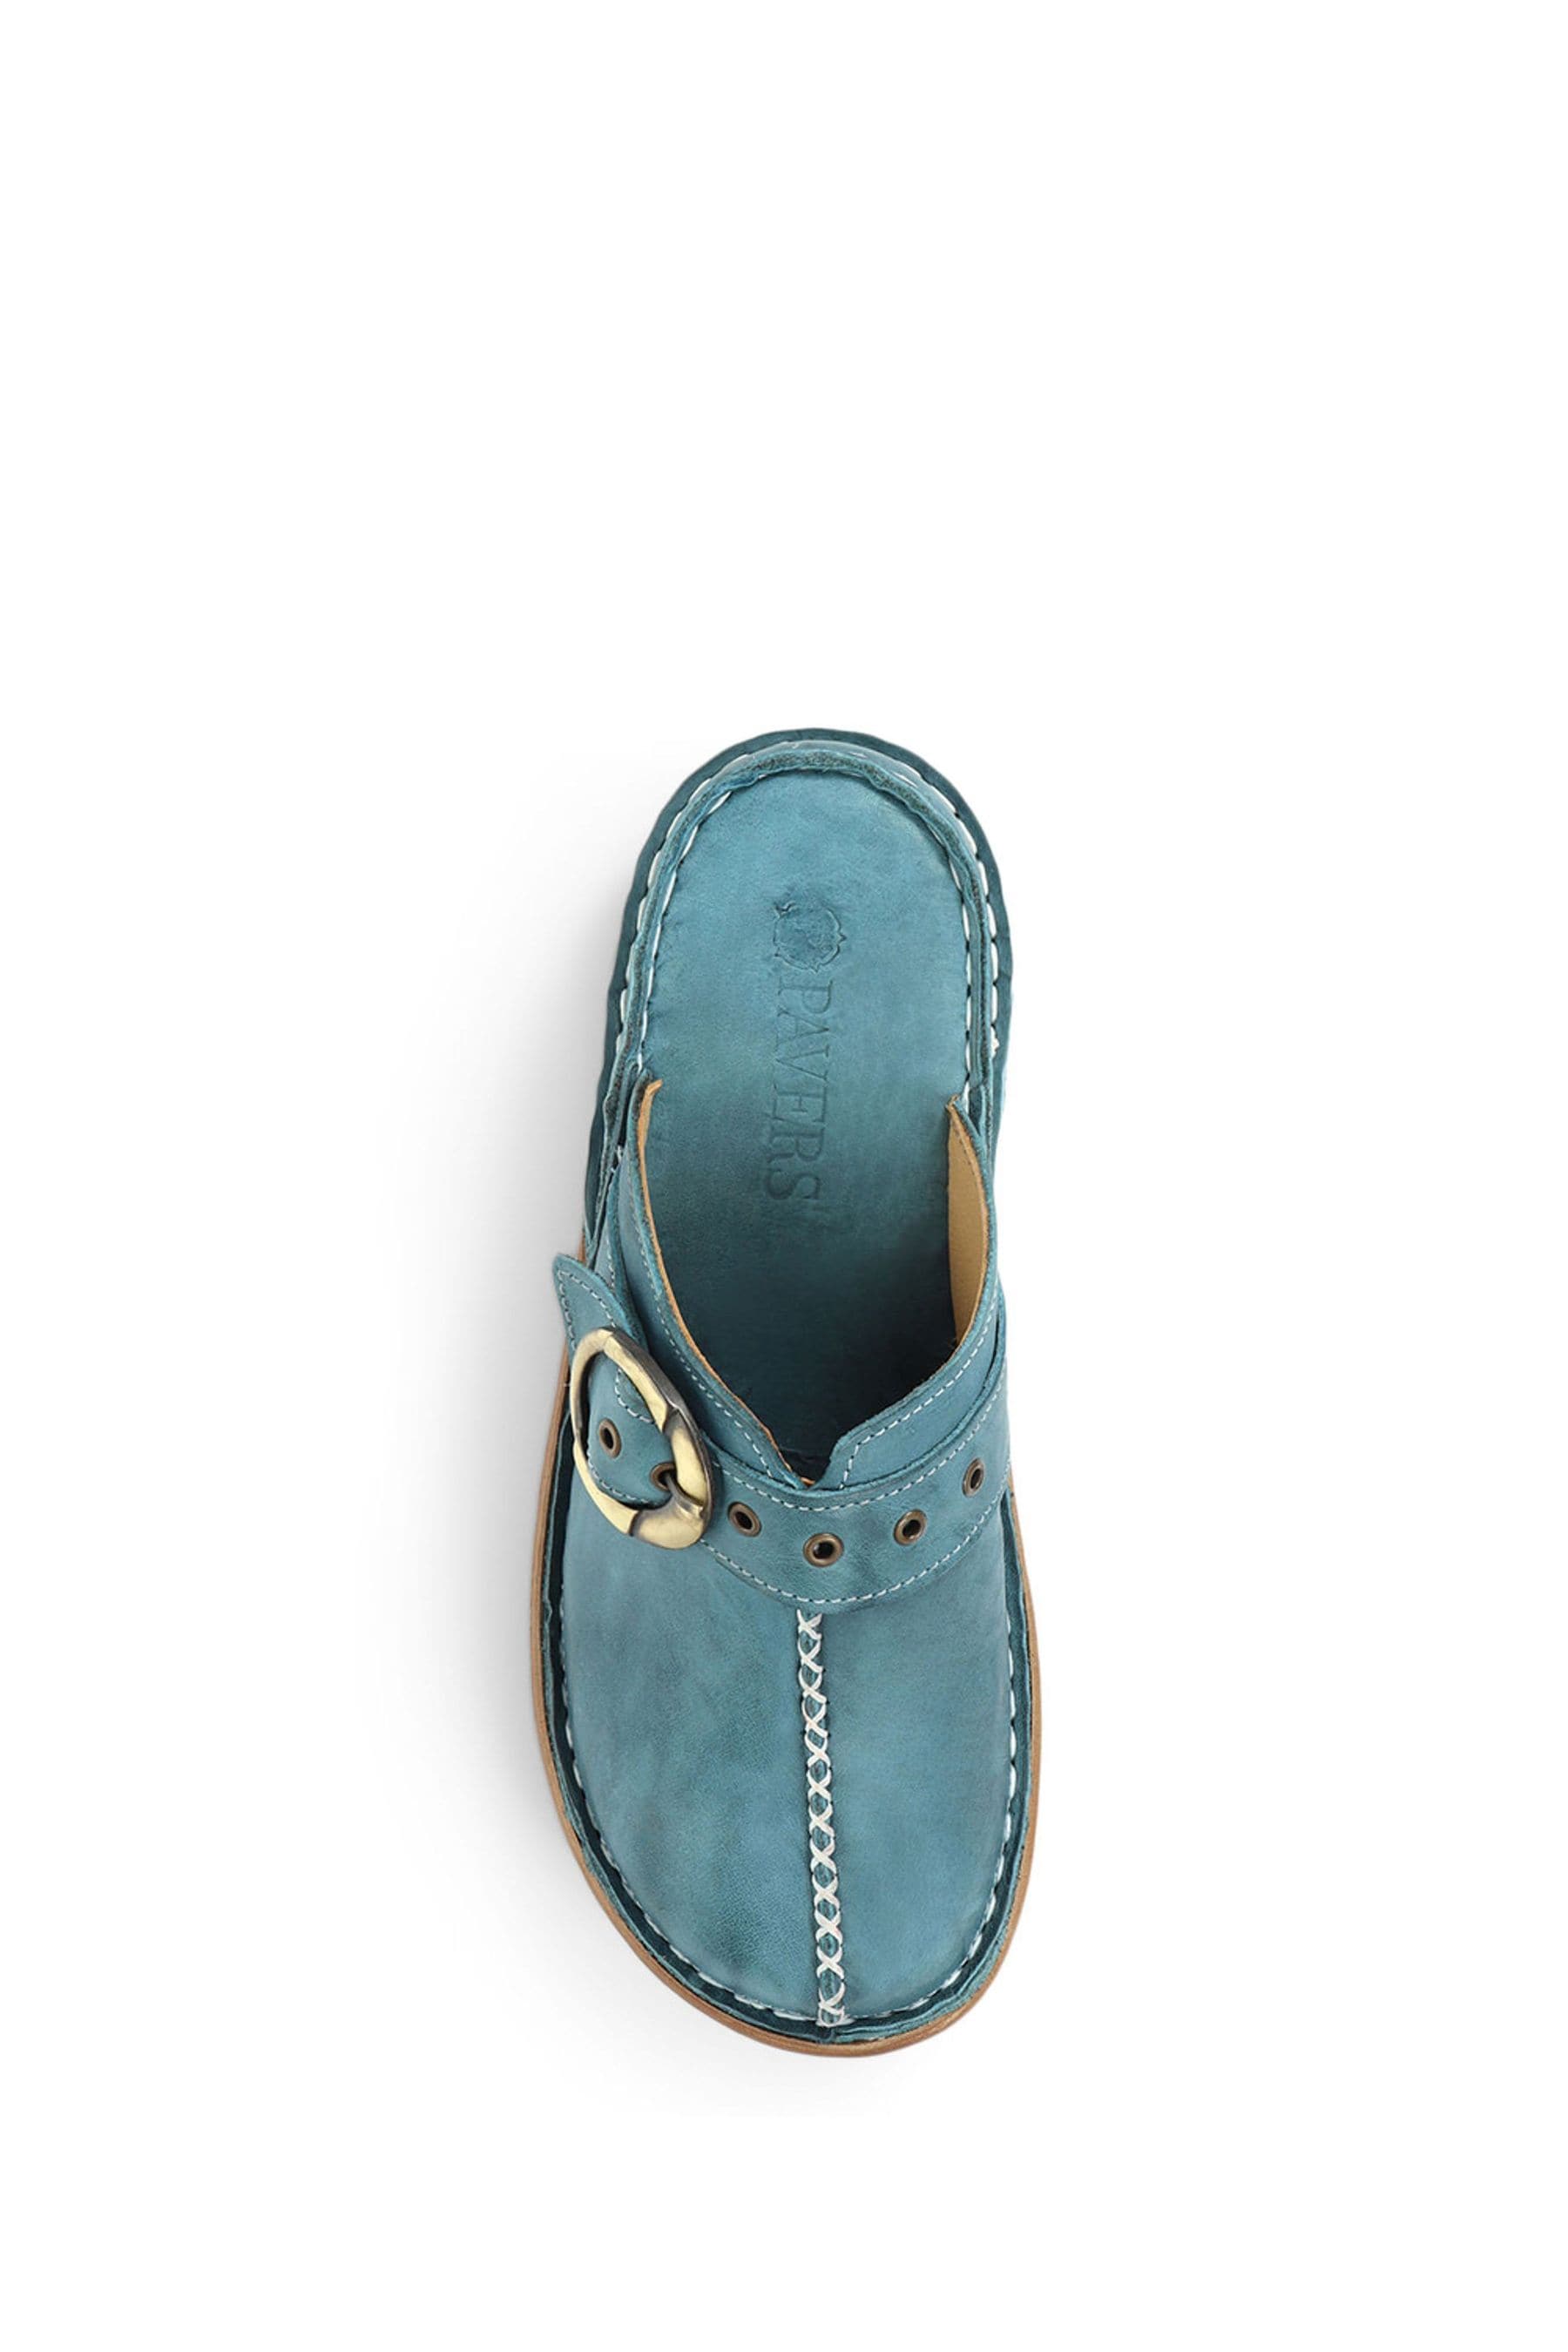 Buy Pavers Ladies Lightweight Leather Clogs from the Next UK online shop